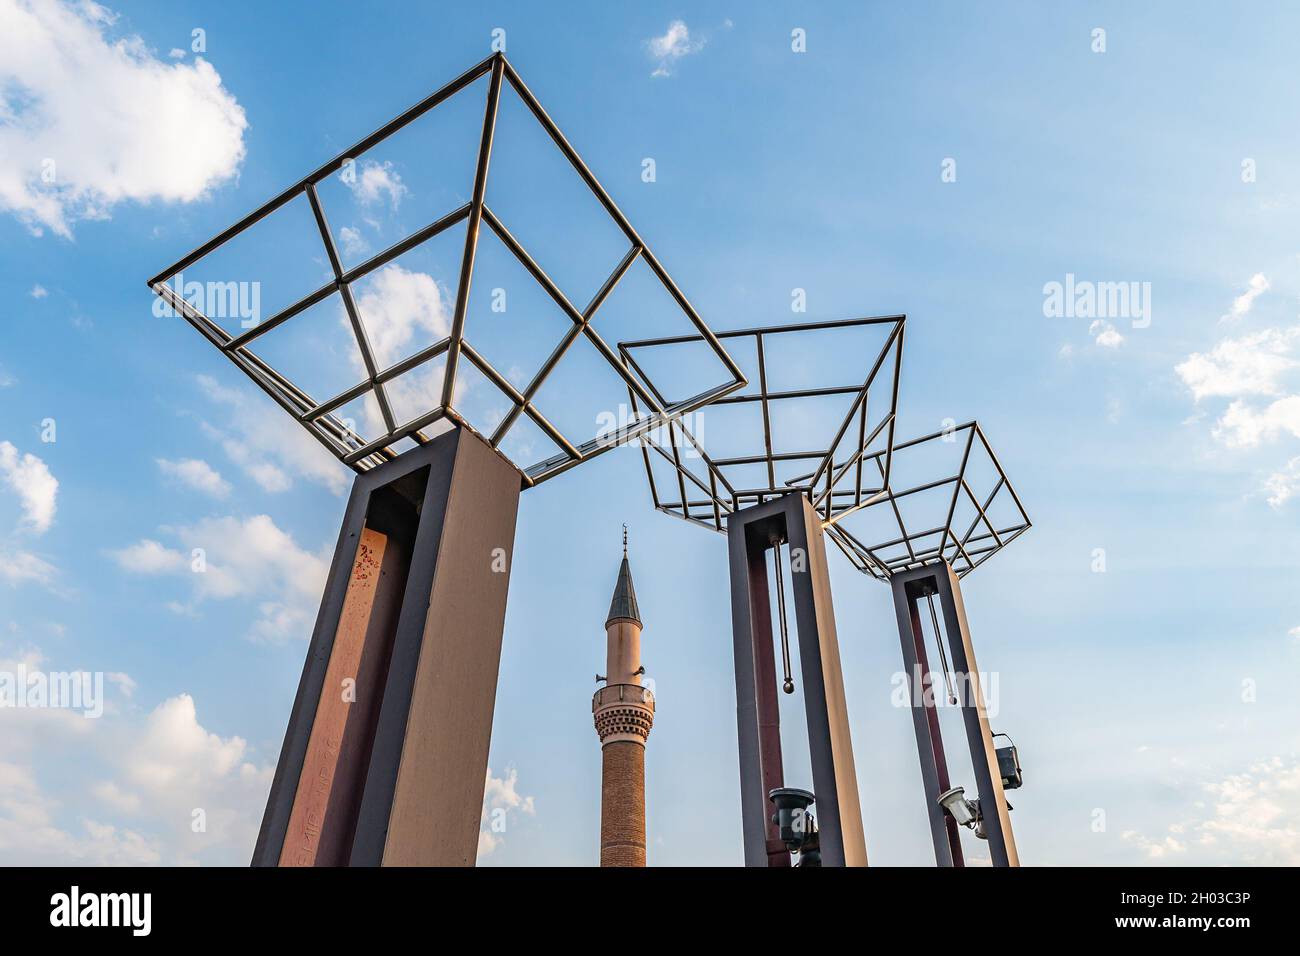 Ankara Haci Musa Mosque Breathtaking Picturesque View of Minaret and Pillars on a Blue Sky Day in Summer Stock Photo